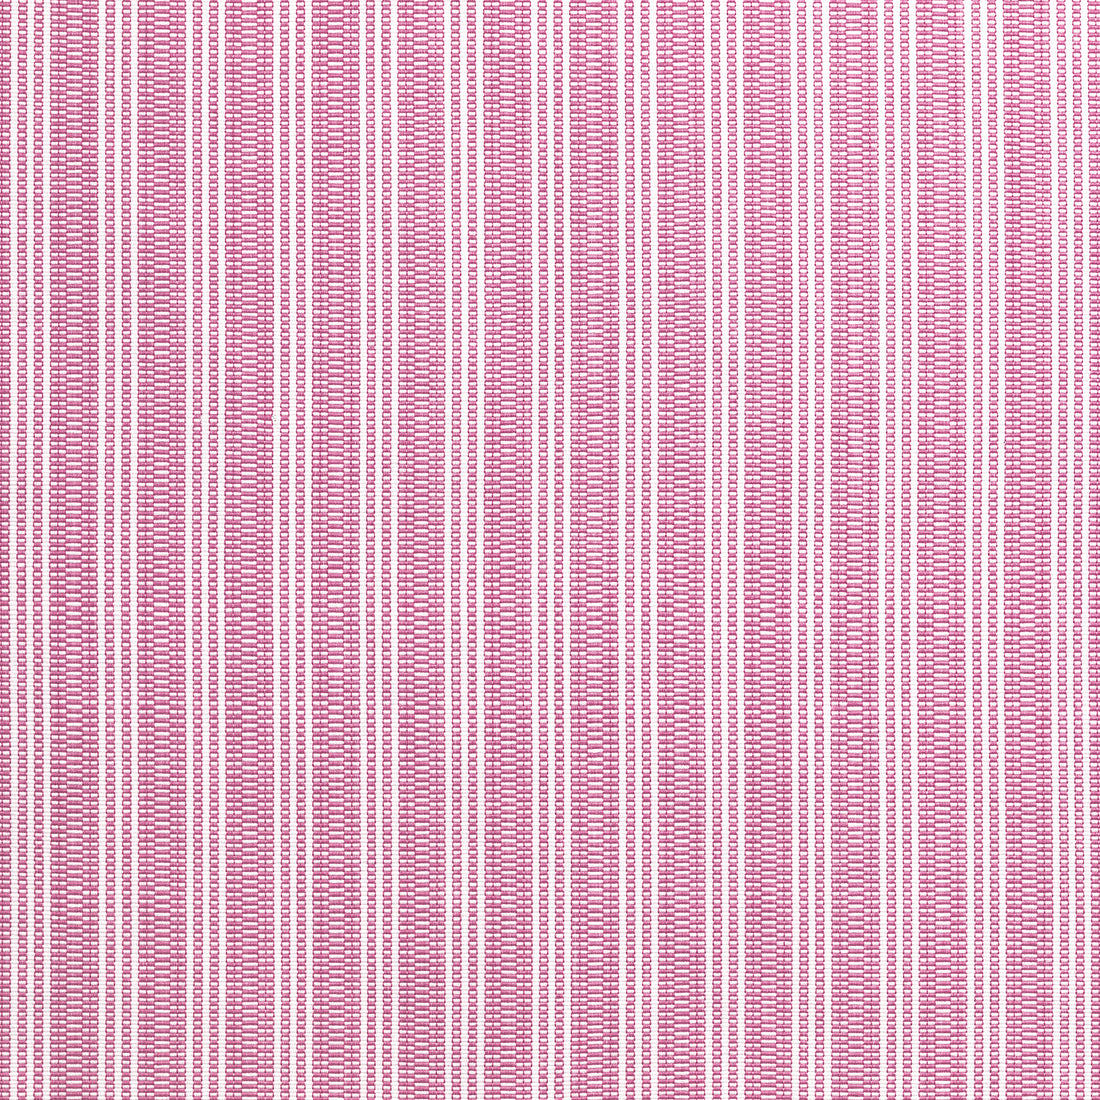 Reed Stripe fabric in fuchsia color - pattern number AW9849 - by Anna French in the Nara collection